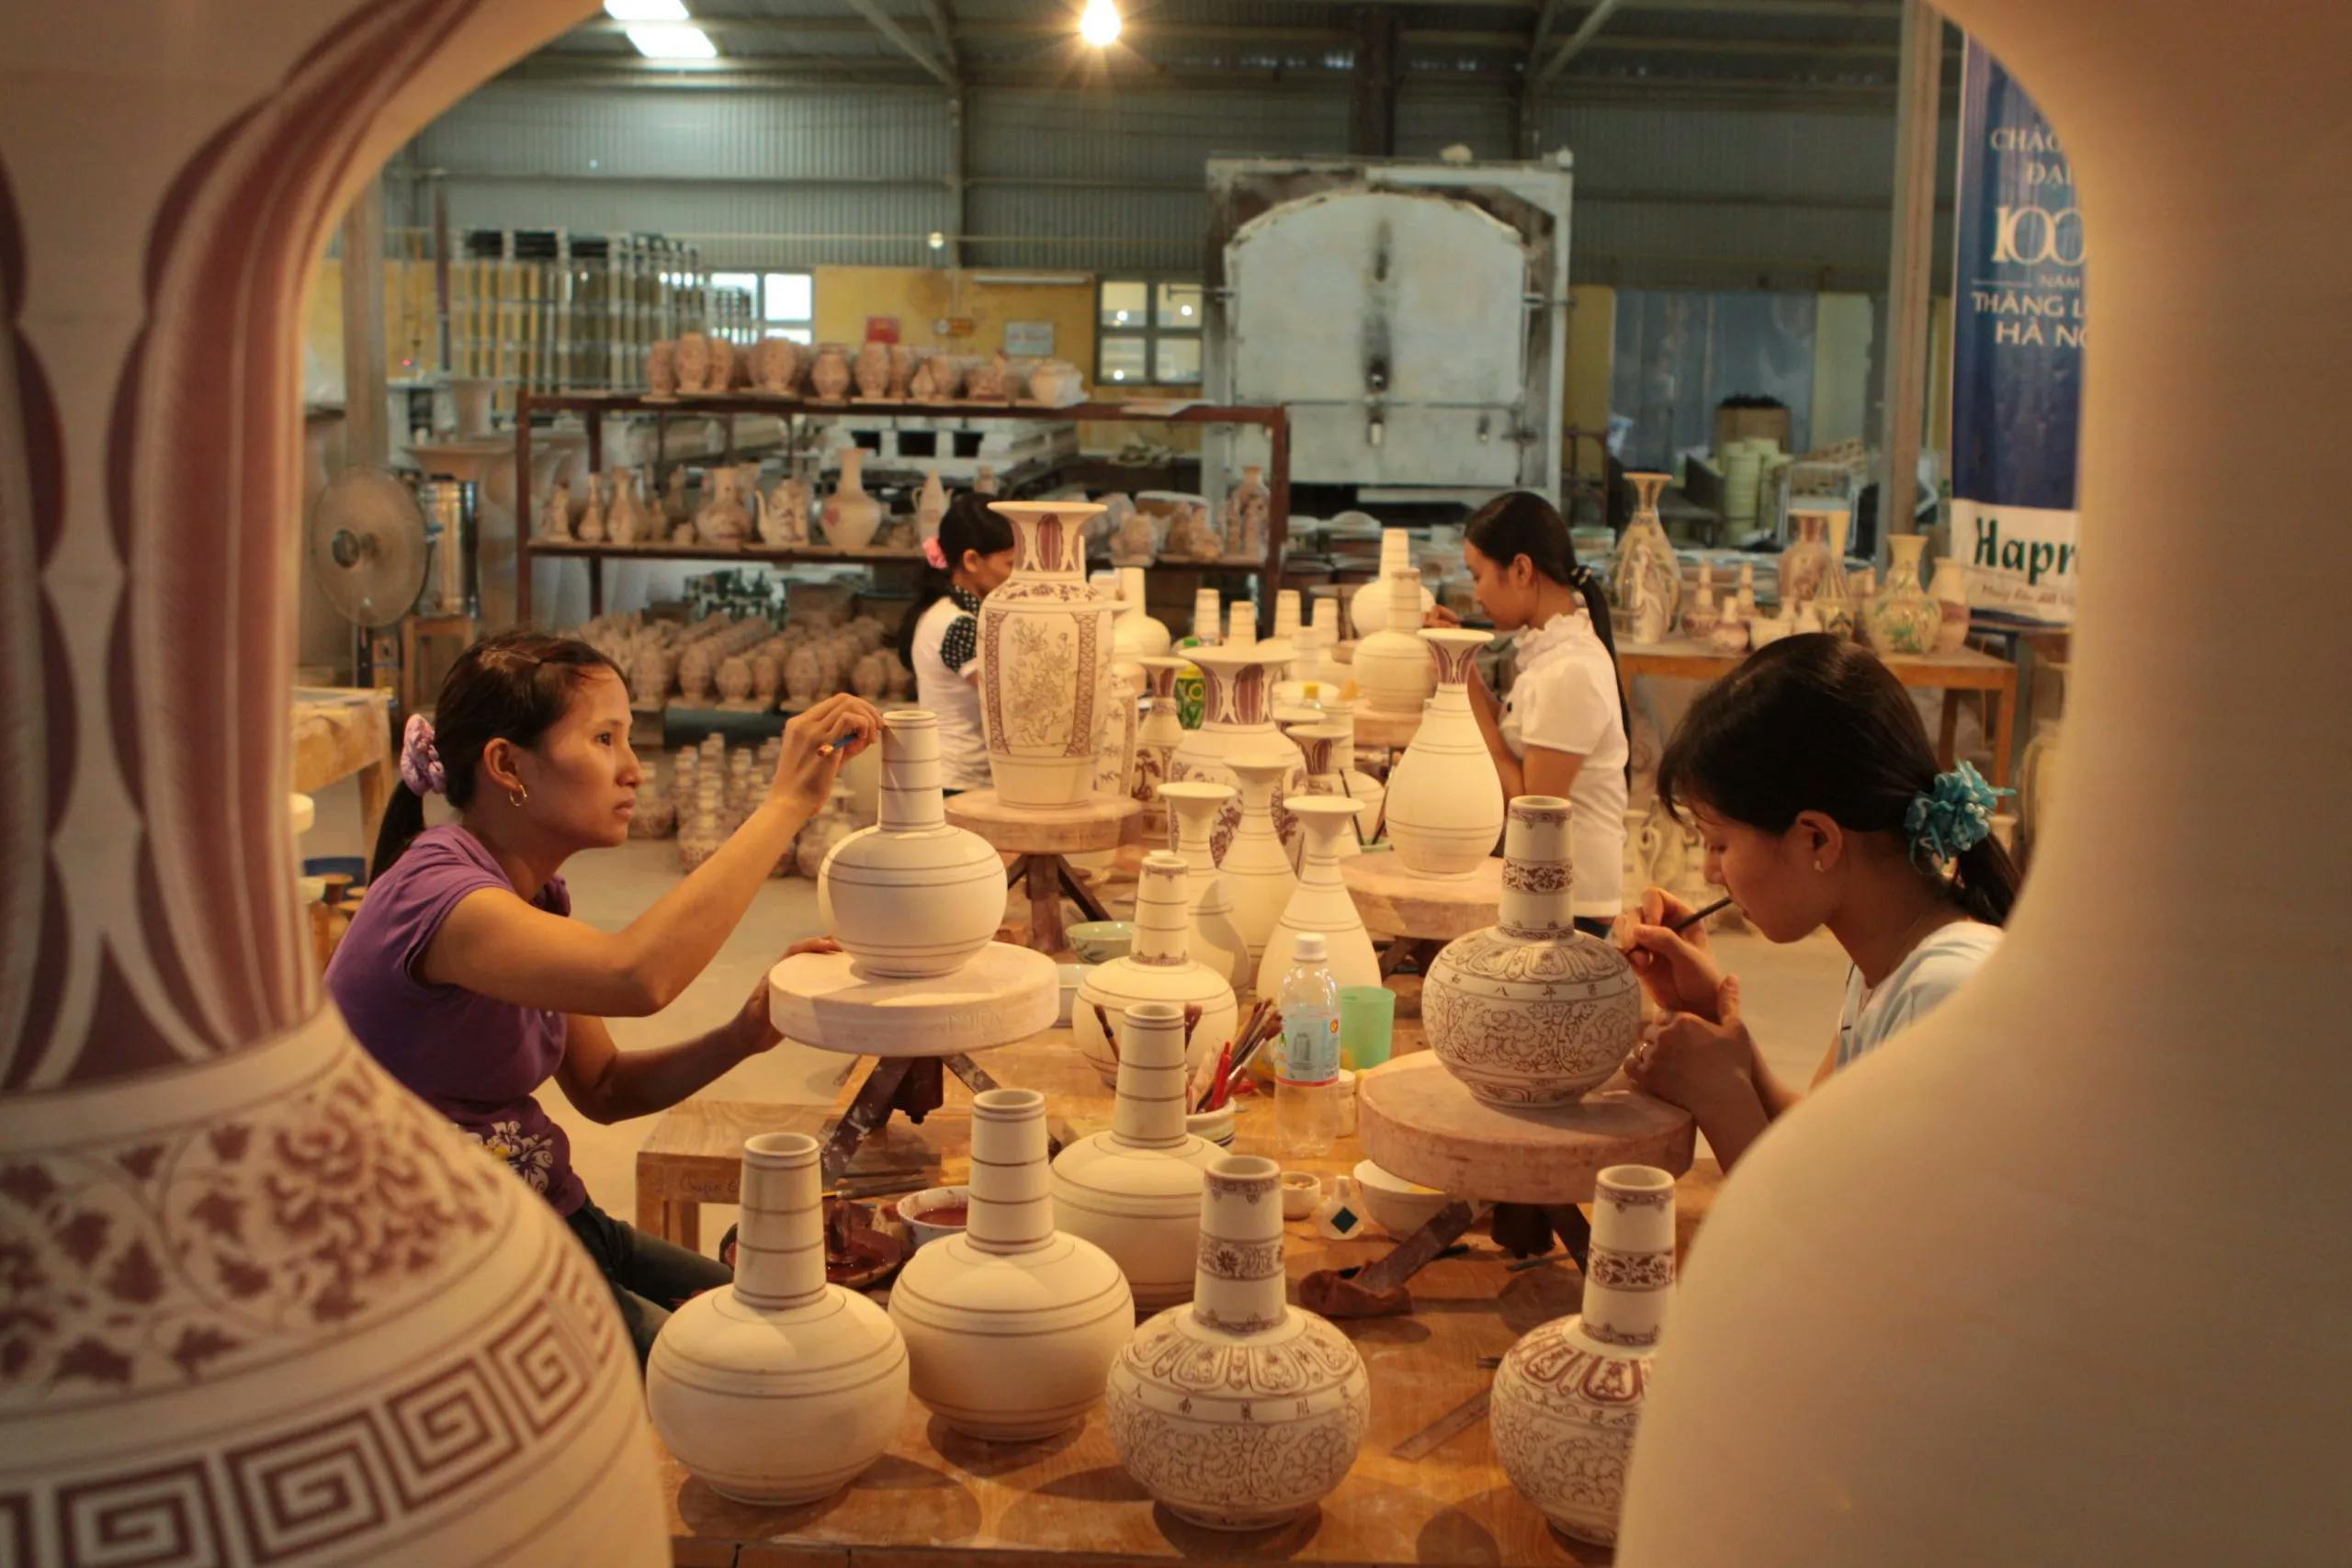 Artists are painting and decorating ceramic vases